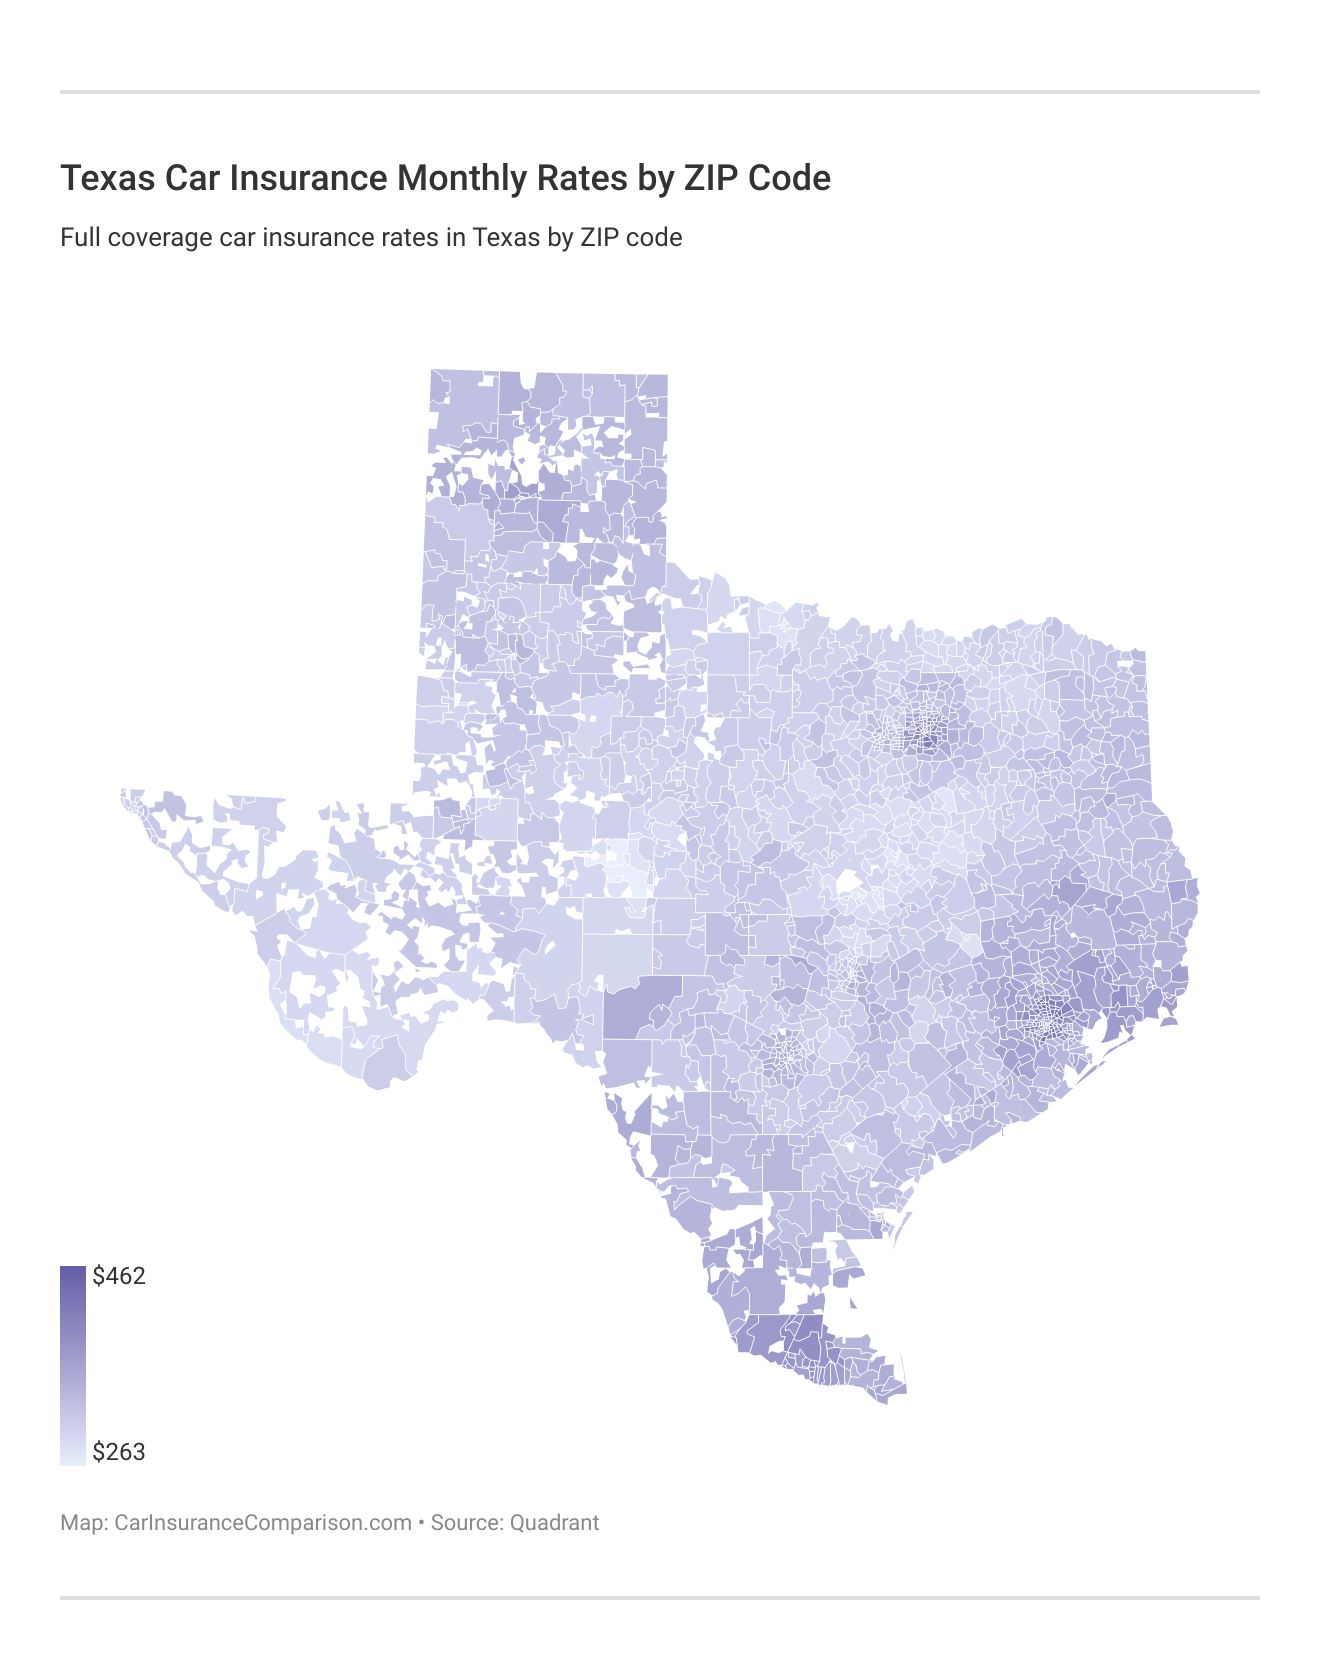 <h3>Texas Car Insurance Monthly Rates by ZIP Code</h3>